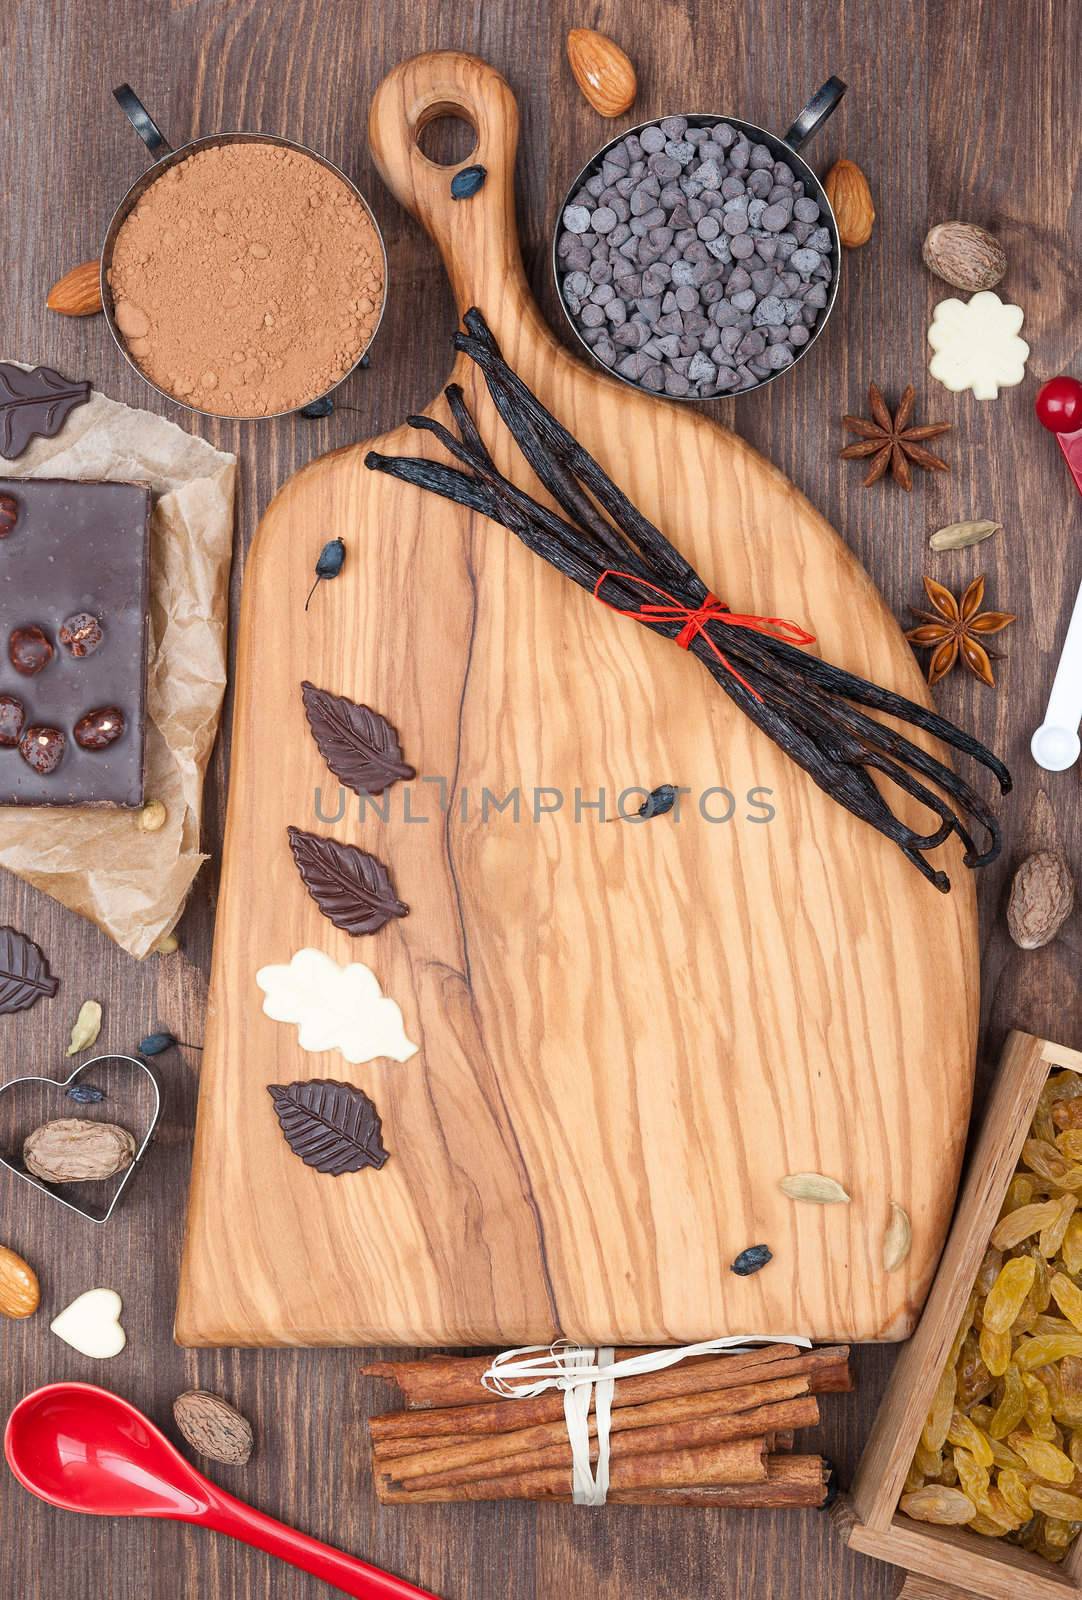 Wooden board with prepared to sweet chocolate baking ingredients